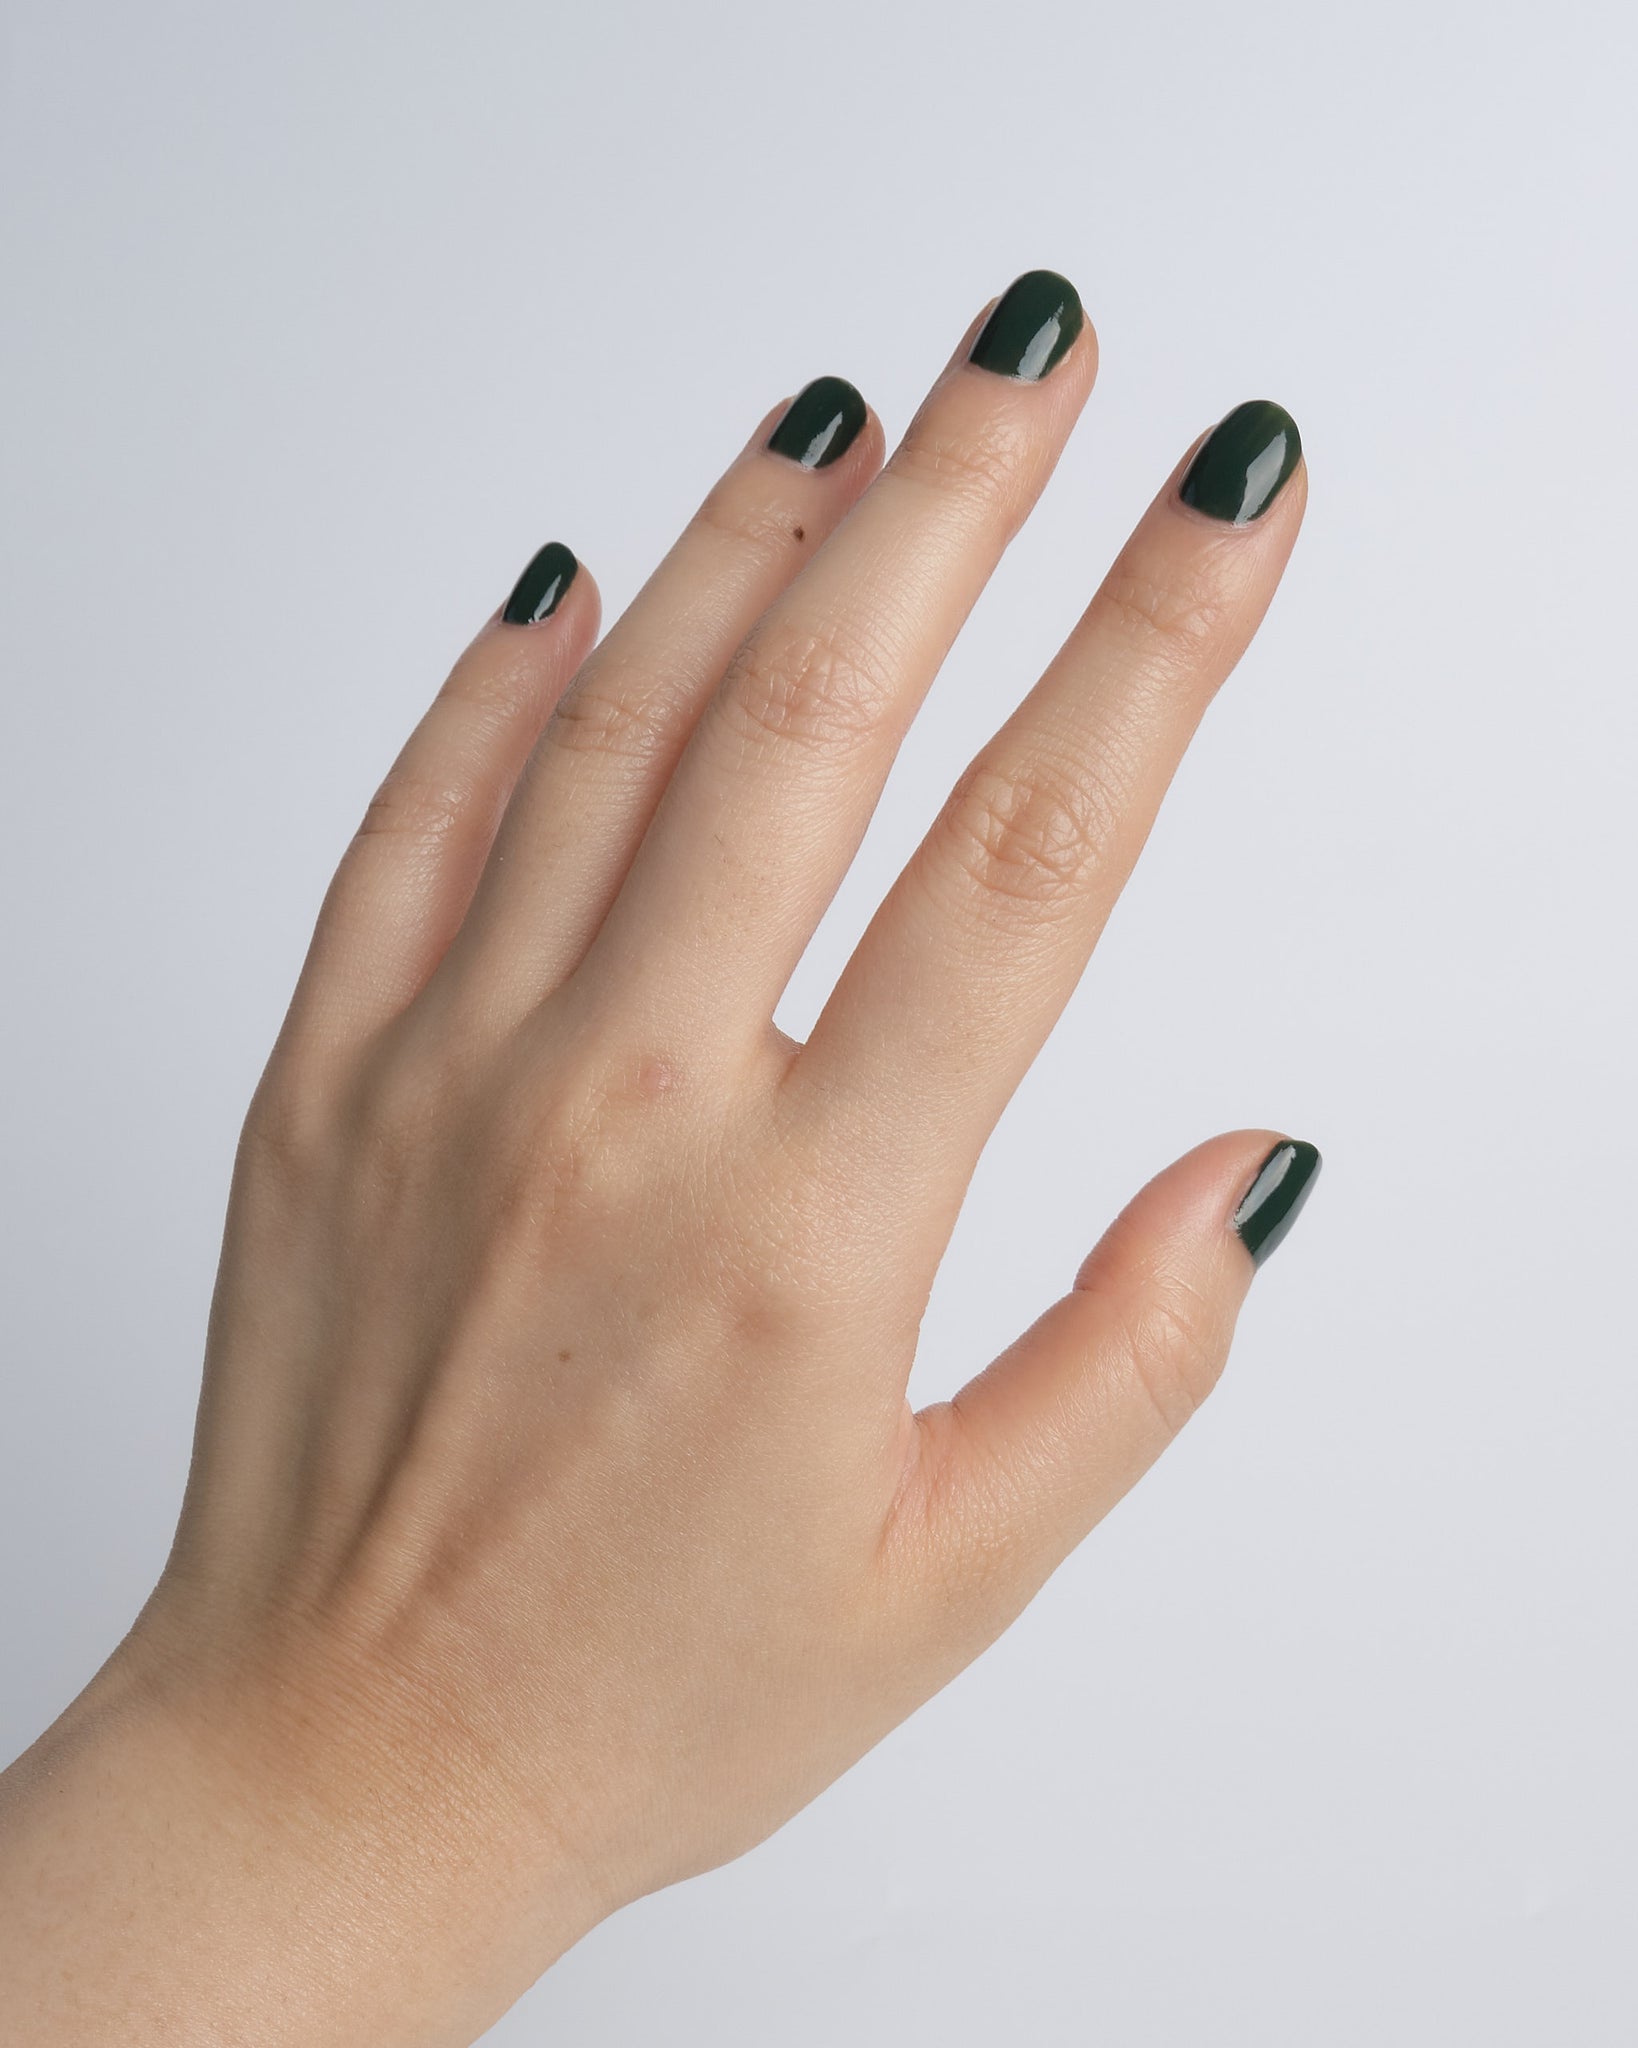 C17 Forest • WATERBASED NAIL COLOUR